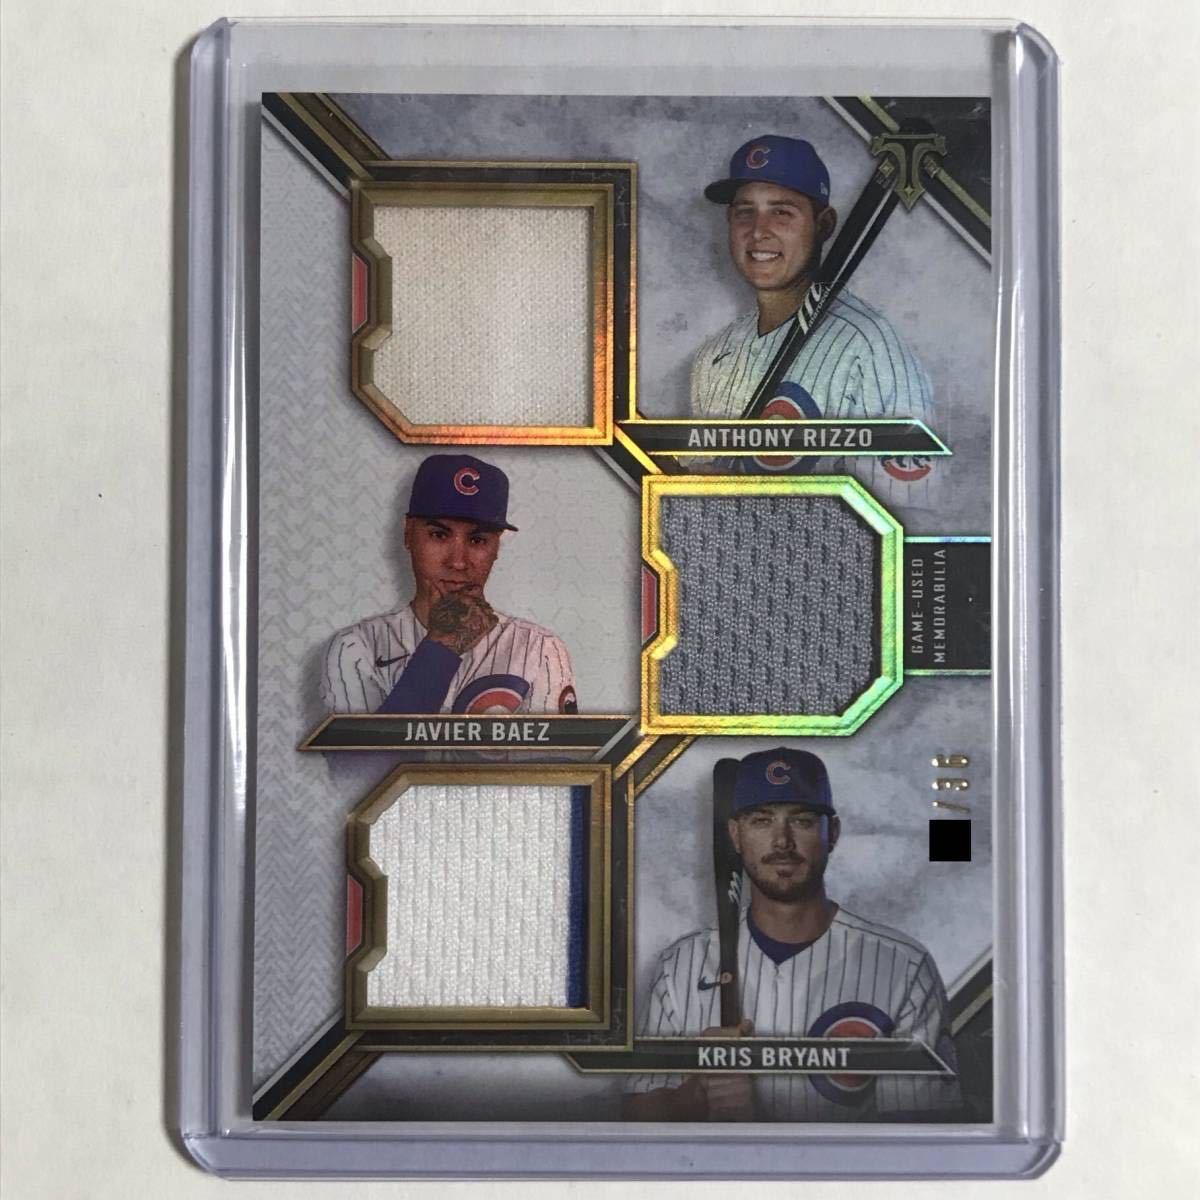 Dirty！[Anthony Rizzo][Kris Bryant][Javier Baez] Legends Relic Combo[2021 Topps Triple Threads Baseball Card]Chicago Cubs jersey_画像1